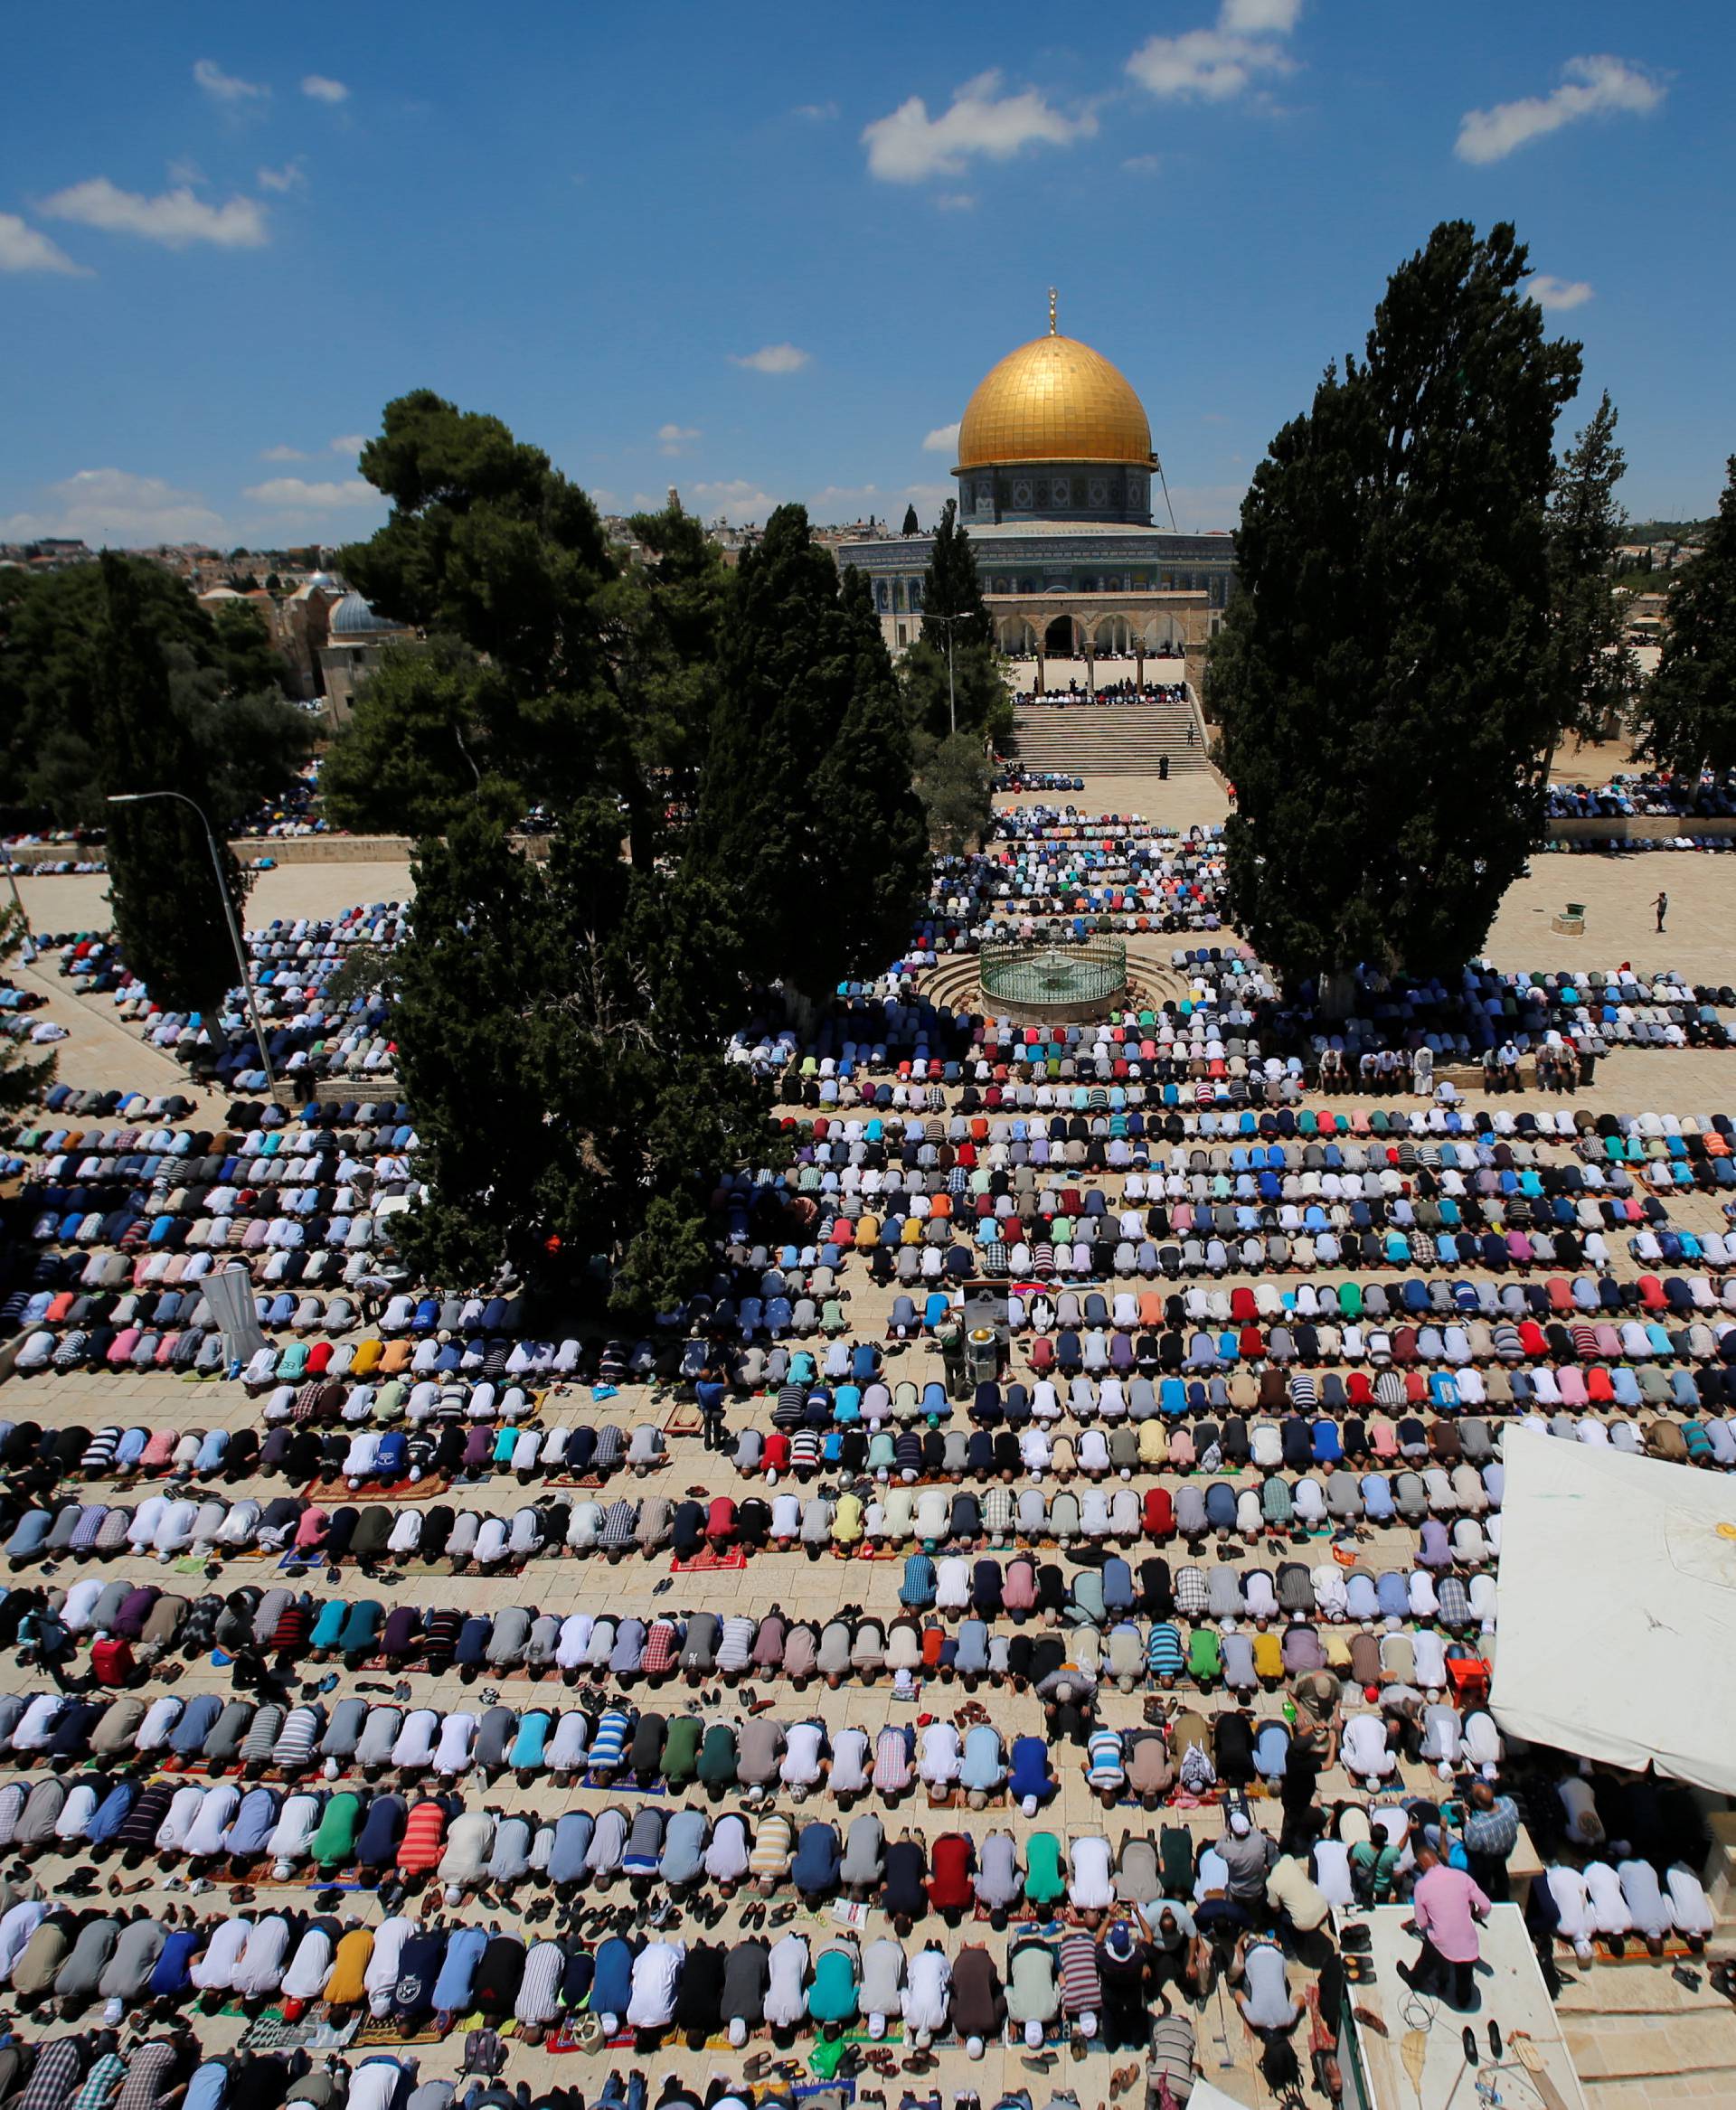 The Dome of the Rock is seen in the background as Palestinians pray on the first Friday of the holy fasting month of Ramadan on the compound known to Muslims as Noble Sanctuary and to Jews as Temple Mount in Jerusalem's Old City 